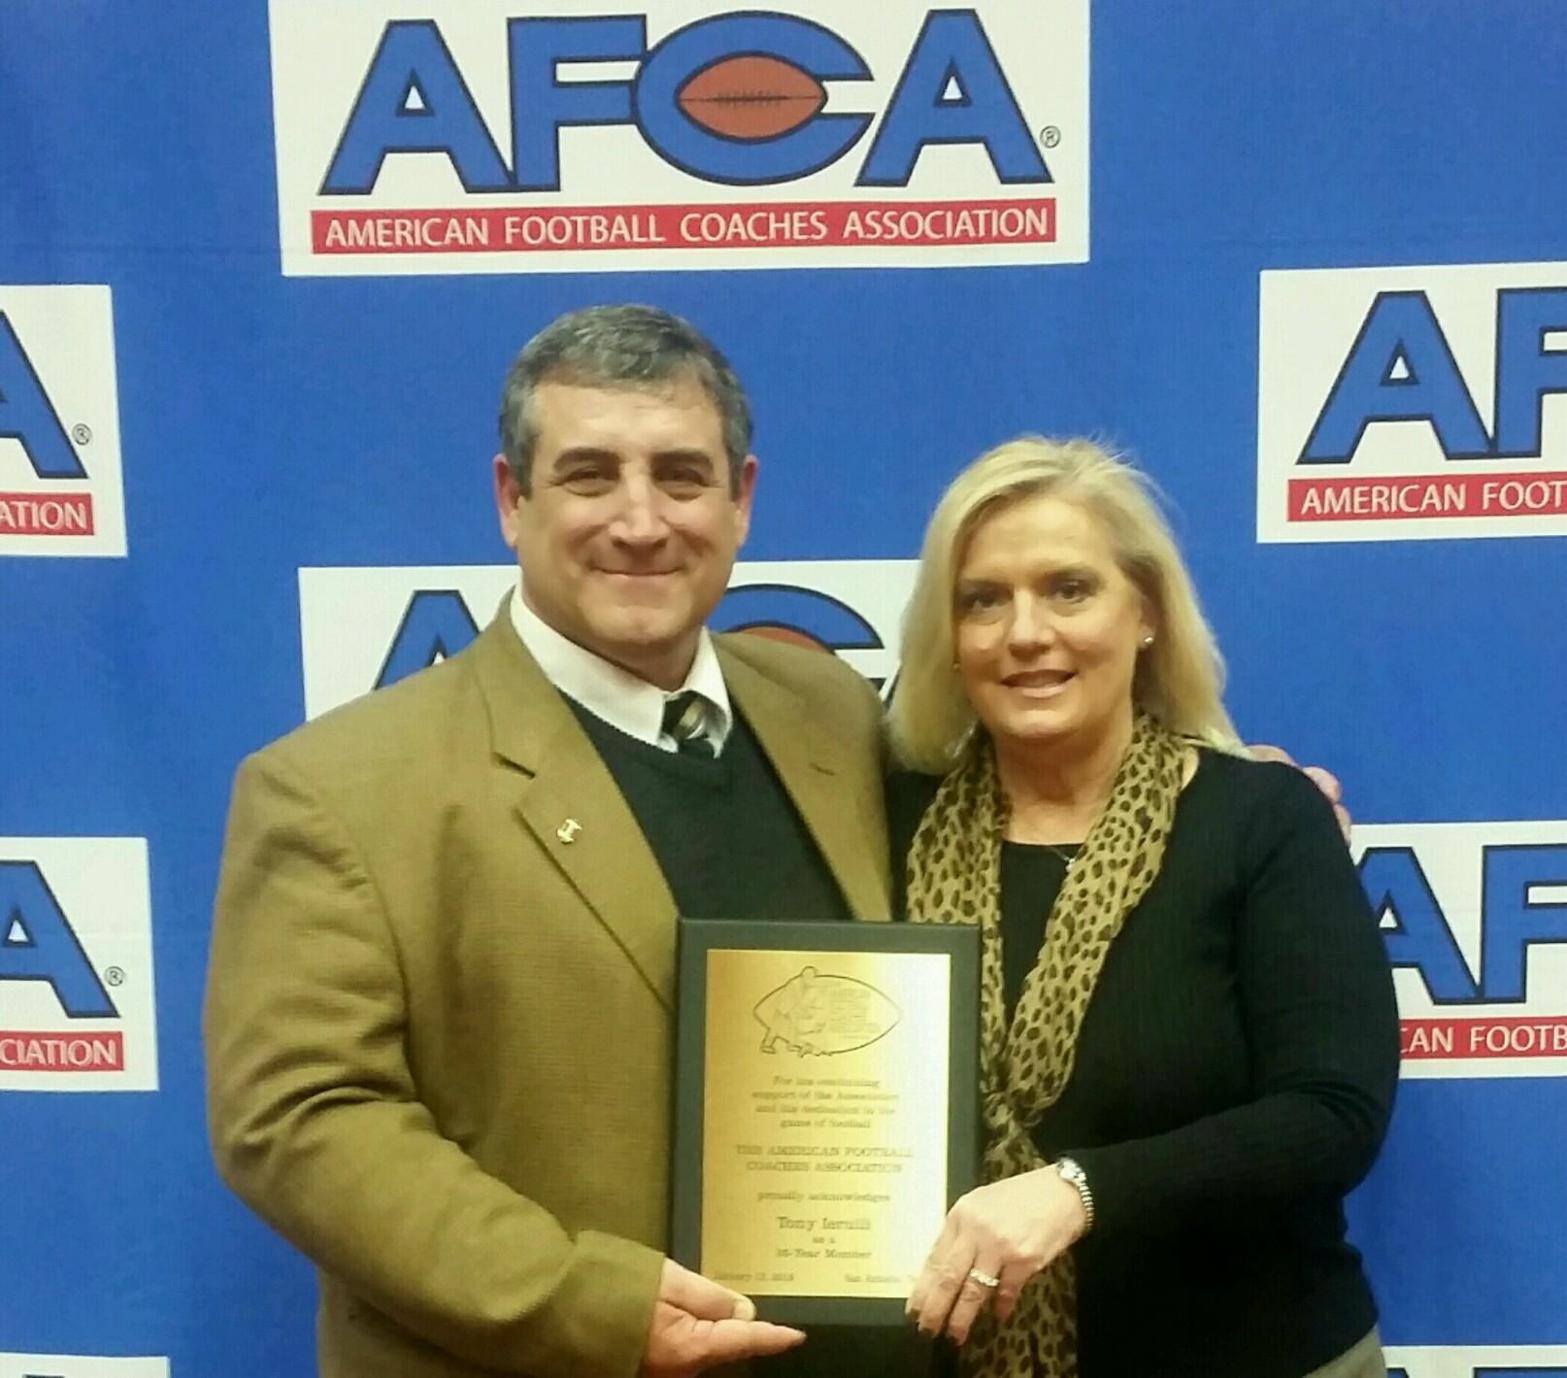 Ierulli presented with 35-year award from AFCA